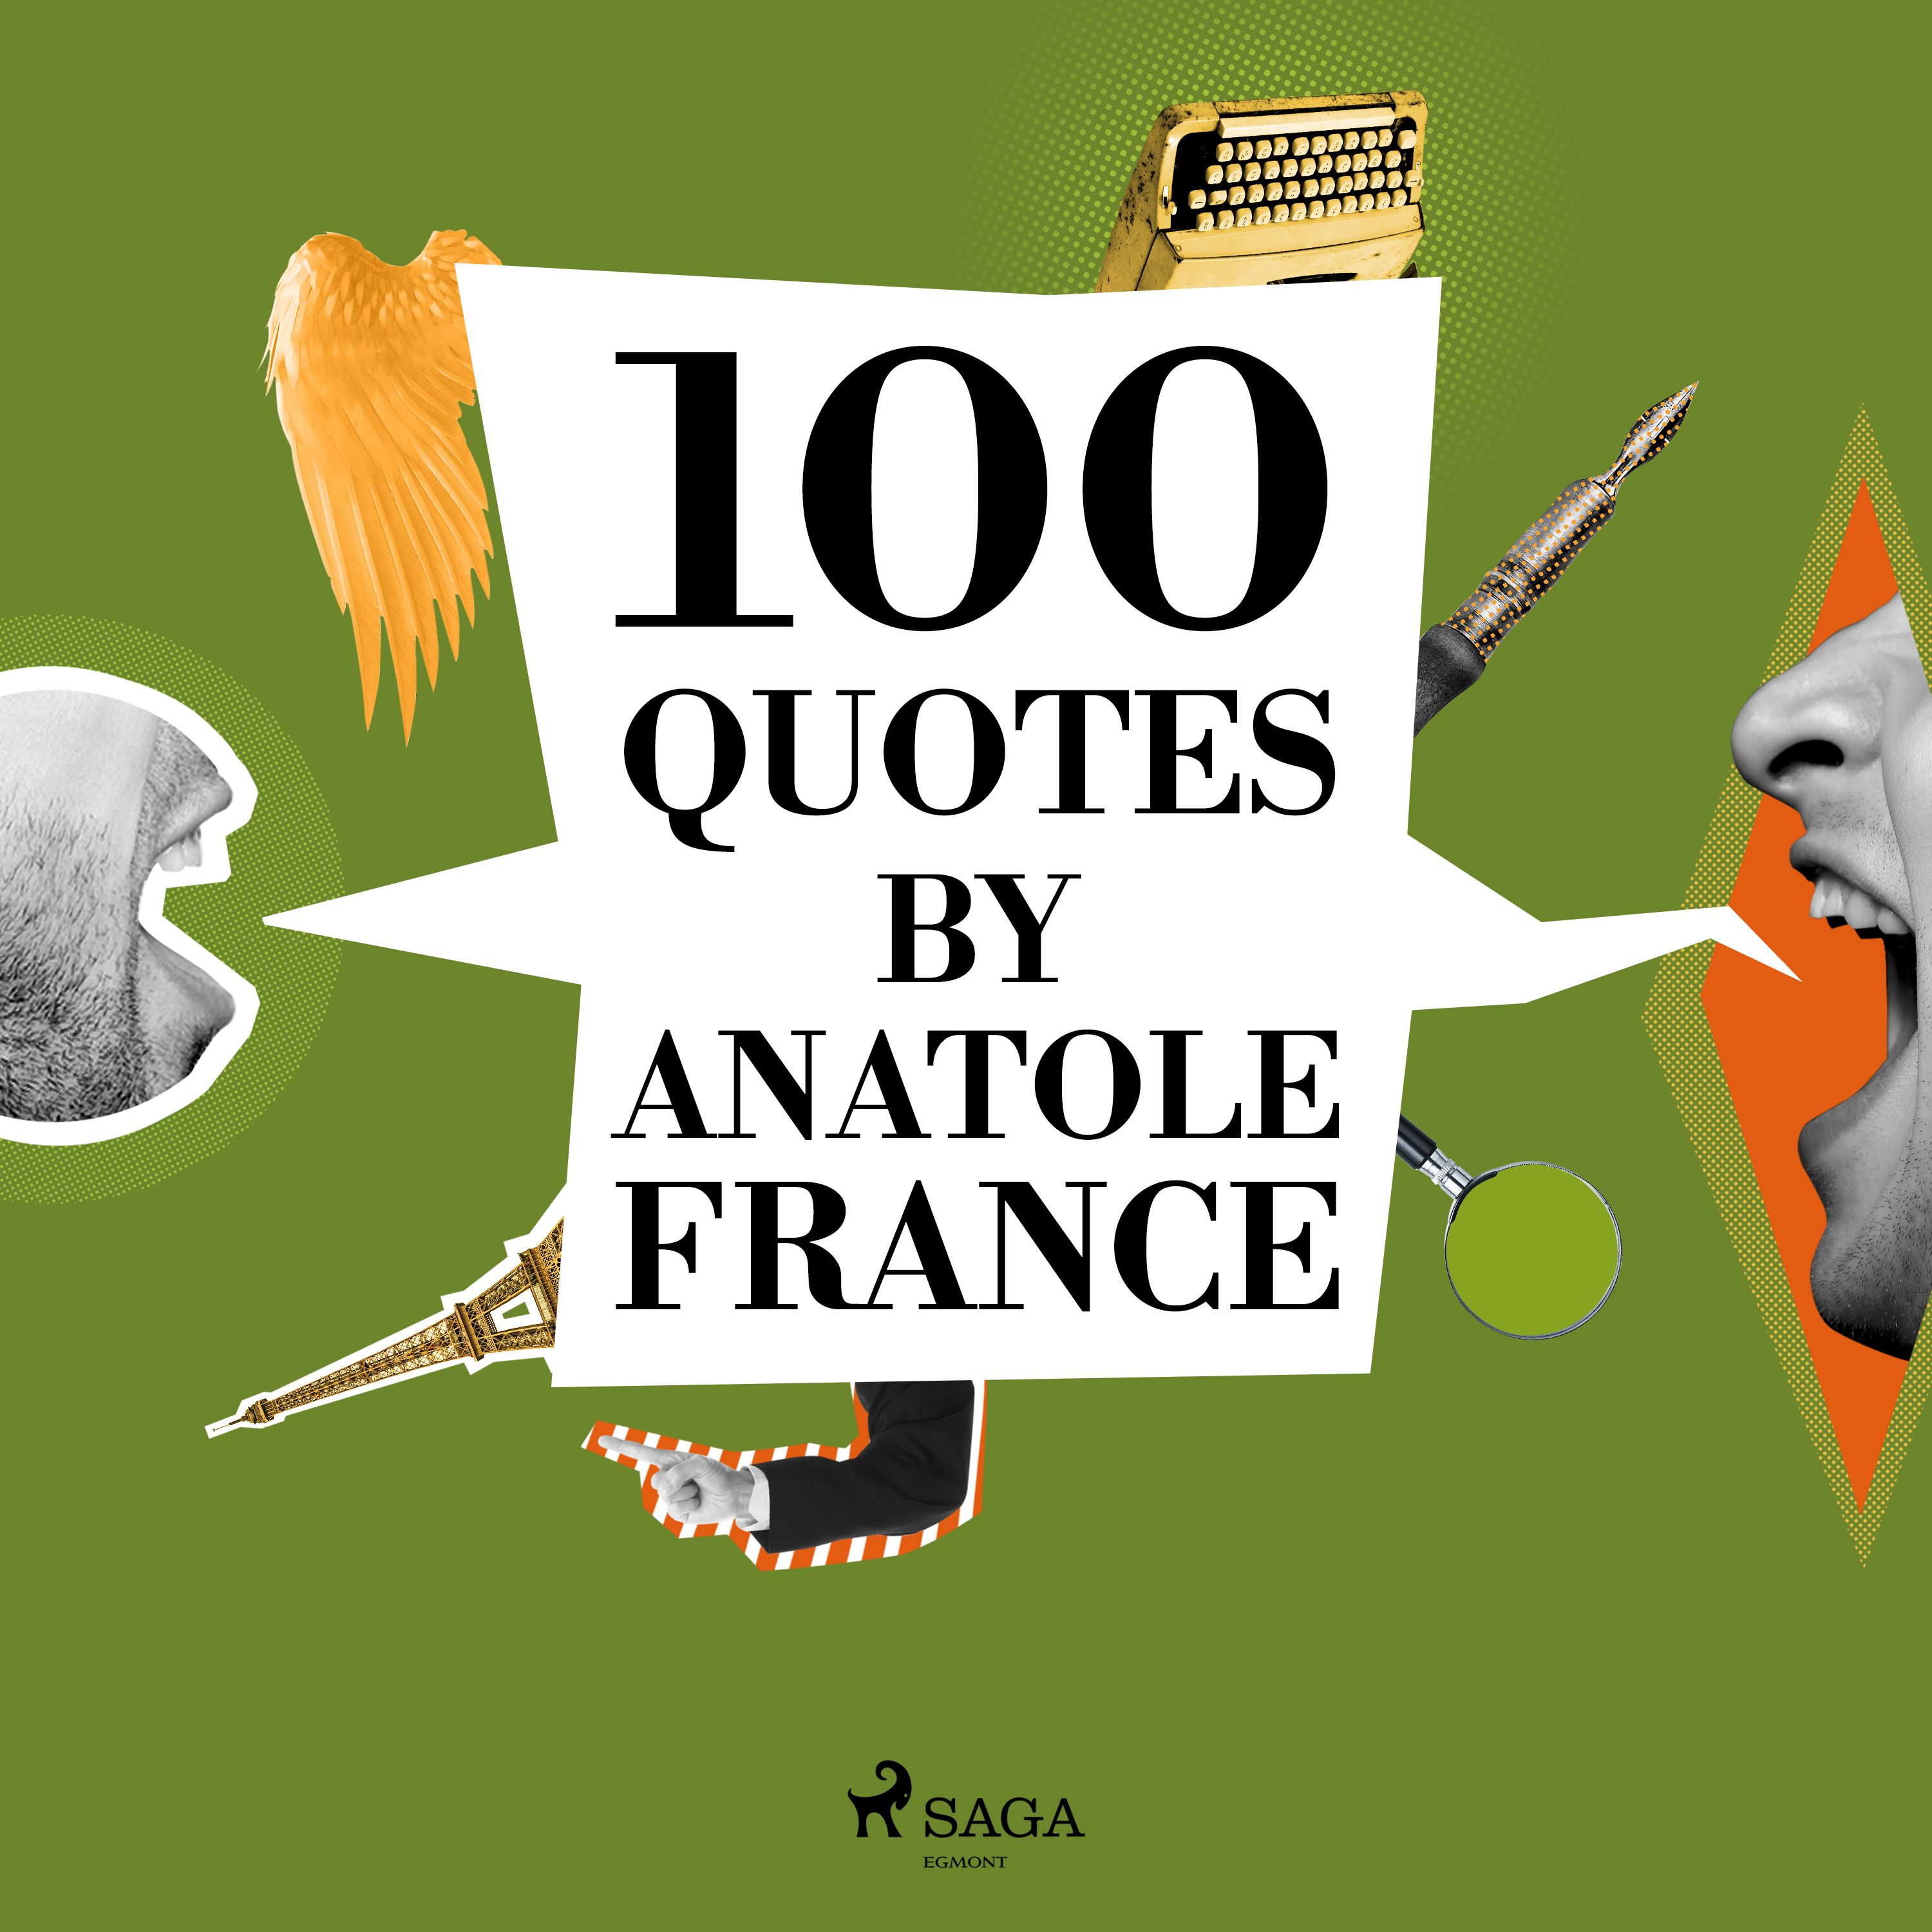 100 Quotes by Anatole France, audiobook by Anatole France